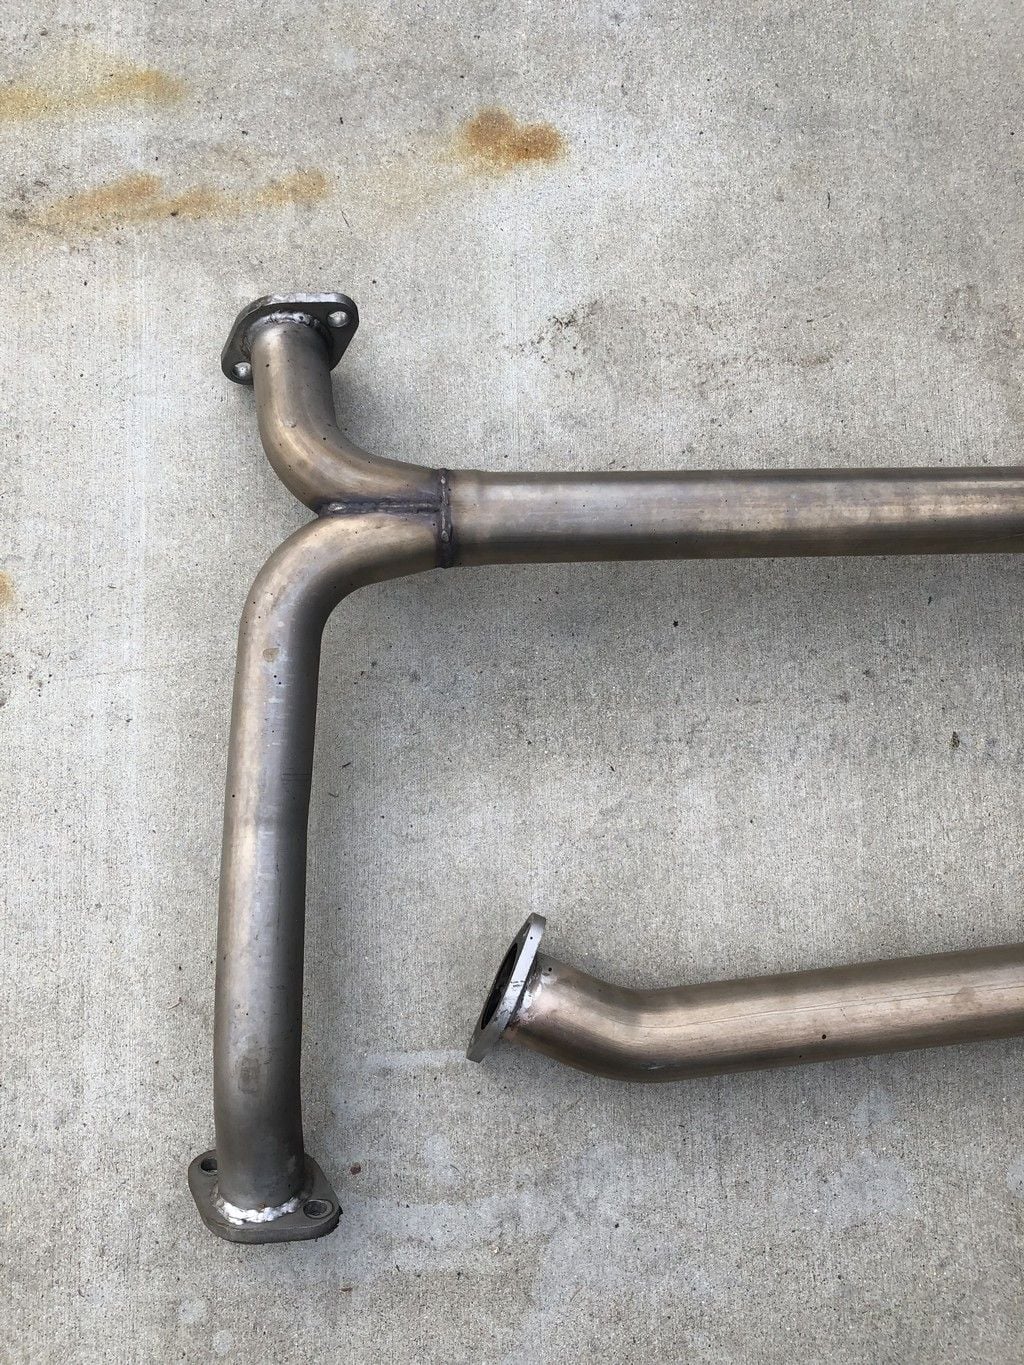 2008 Acura TL - ATLP V2 Quad-tip Performance Exhaust System - Resonated - Engine - Exhaust - $800 - Los Angeles, CA 91775, United States